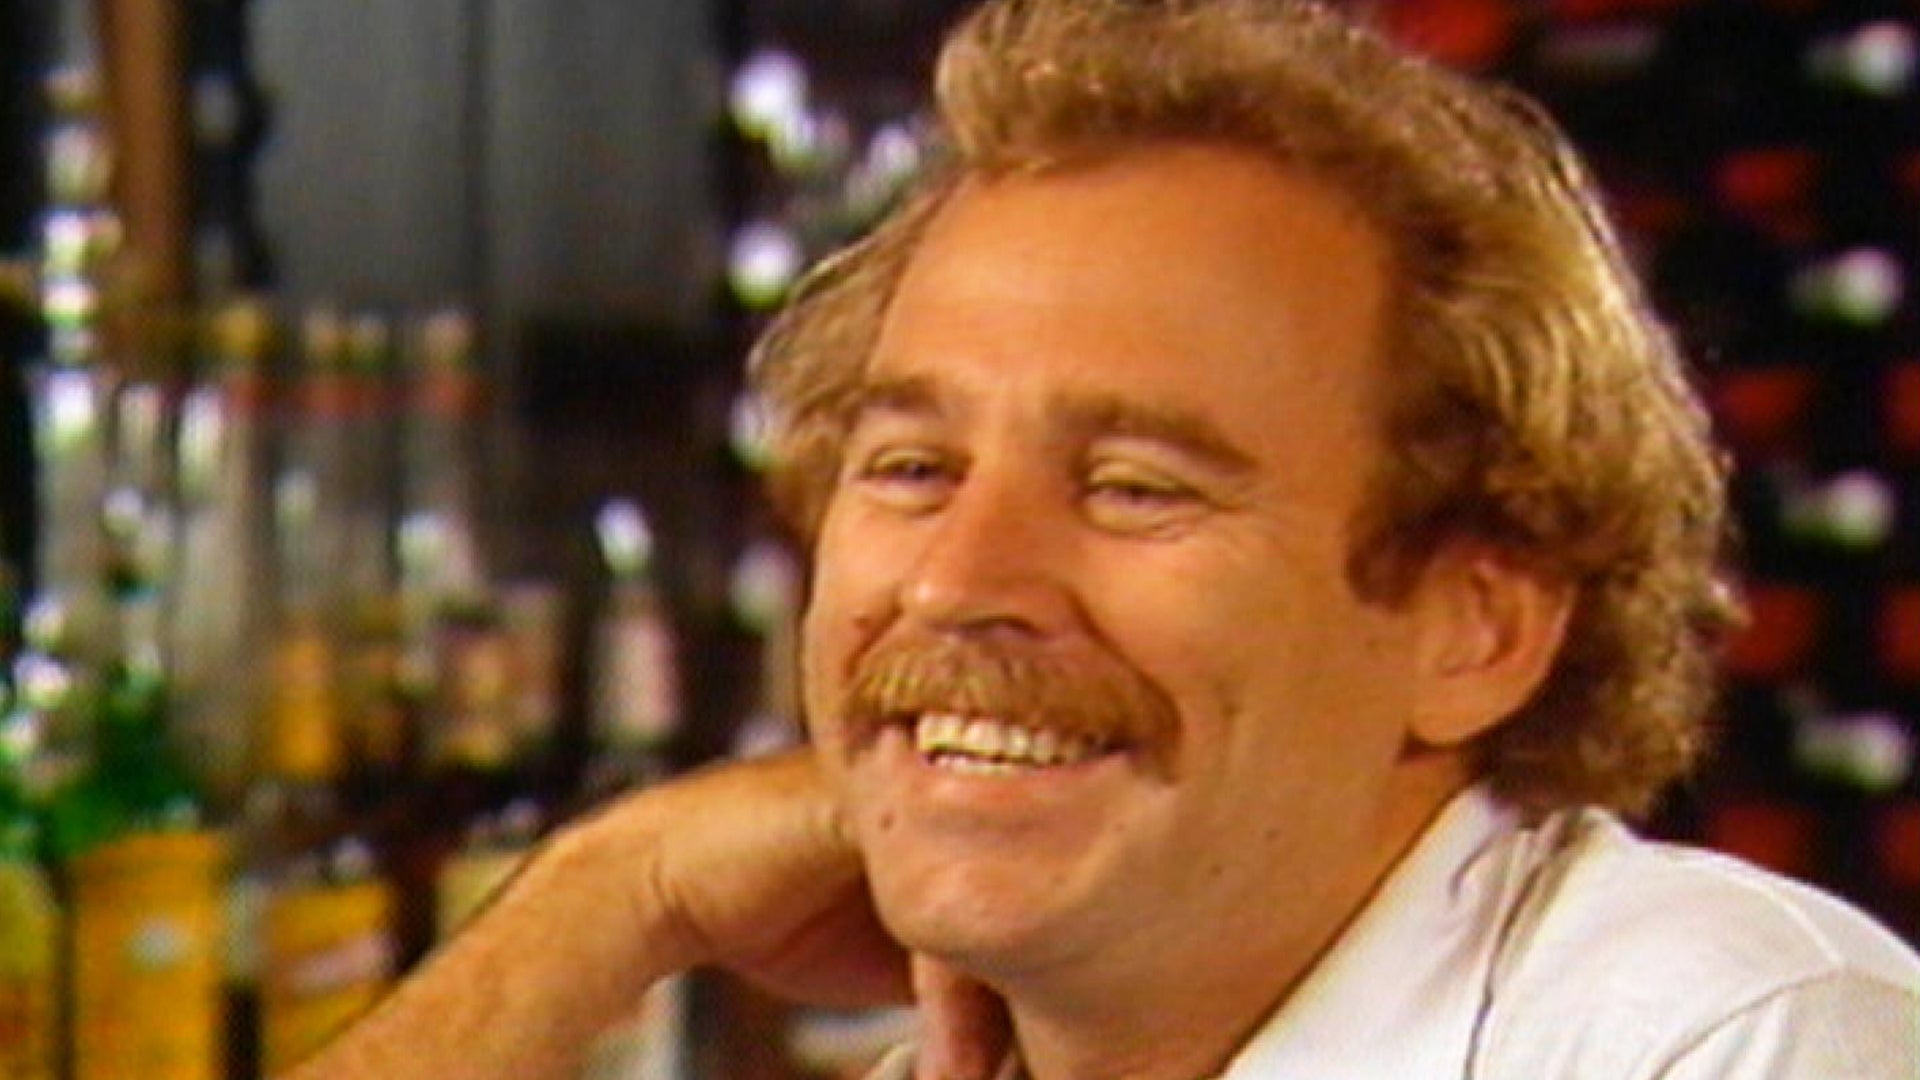 Jimmy Buffett Explains the Meaning Behind 'Margaritaville' in First ET Interview (Flashback)